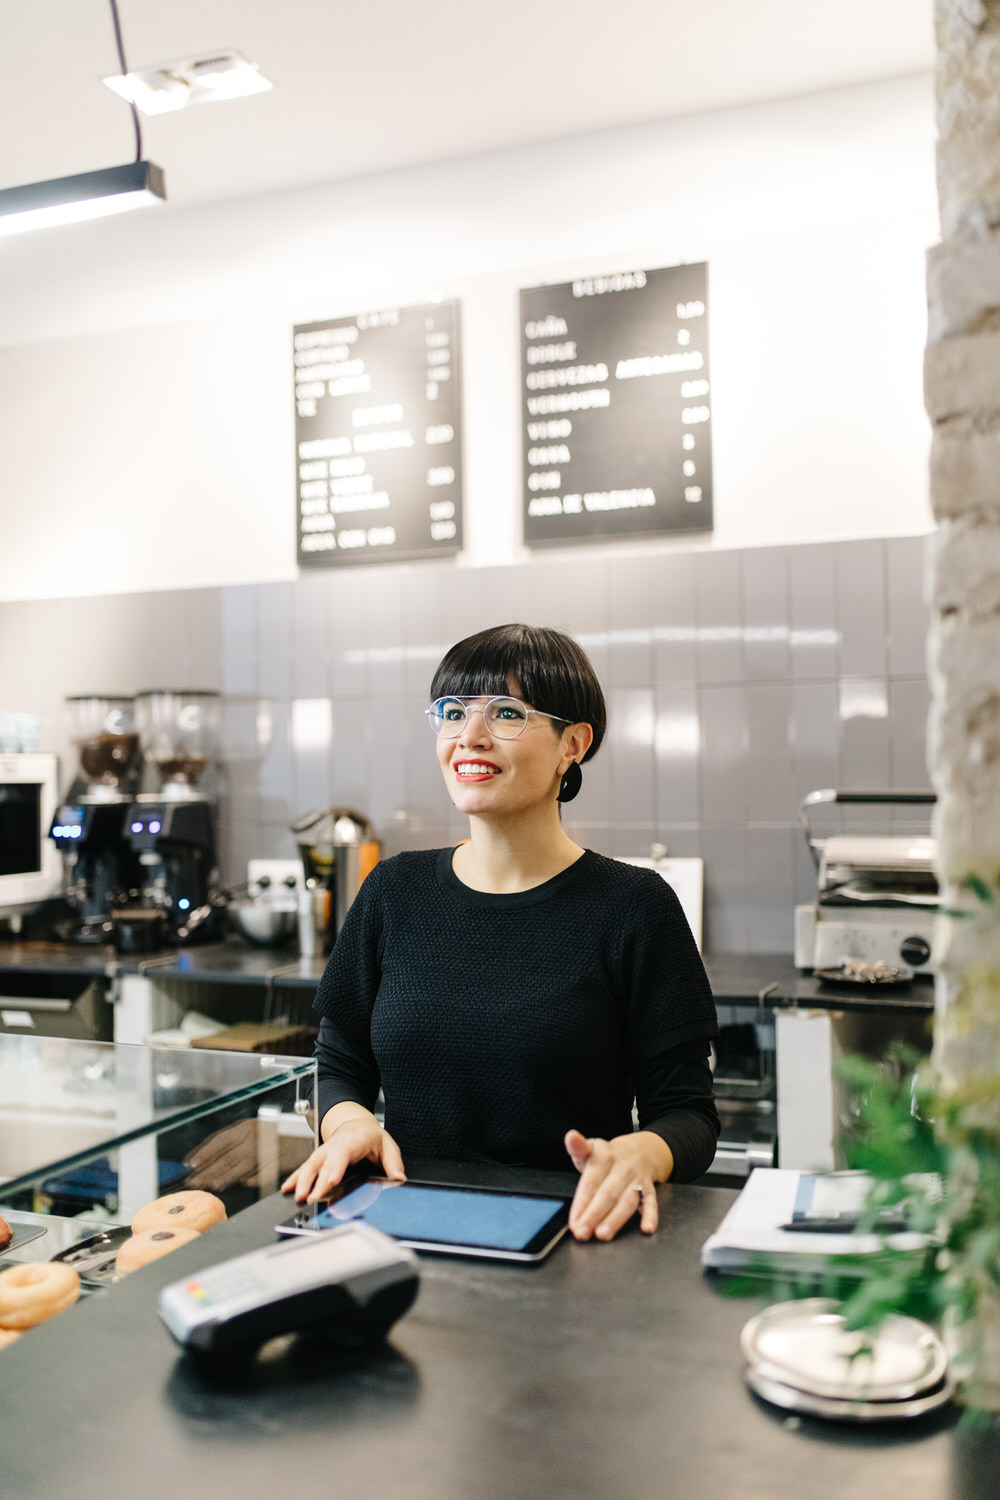 Smiling barista using tablet near cafe counter